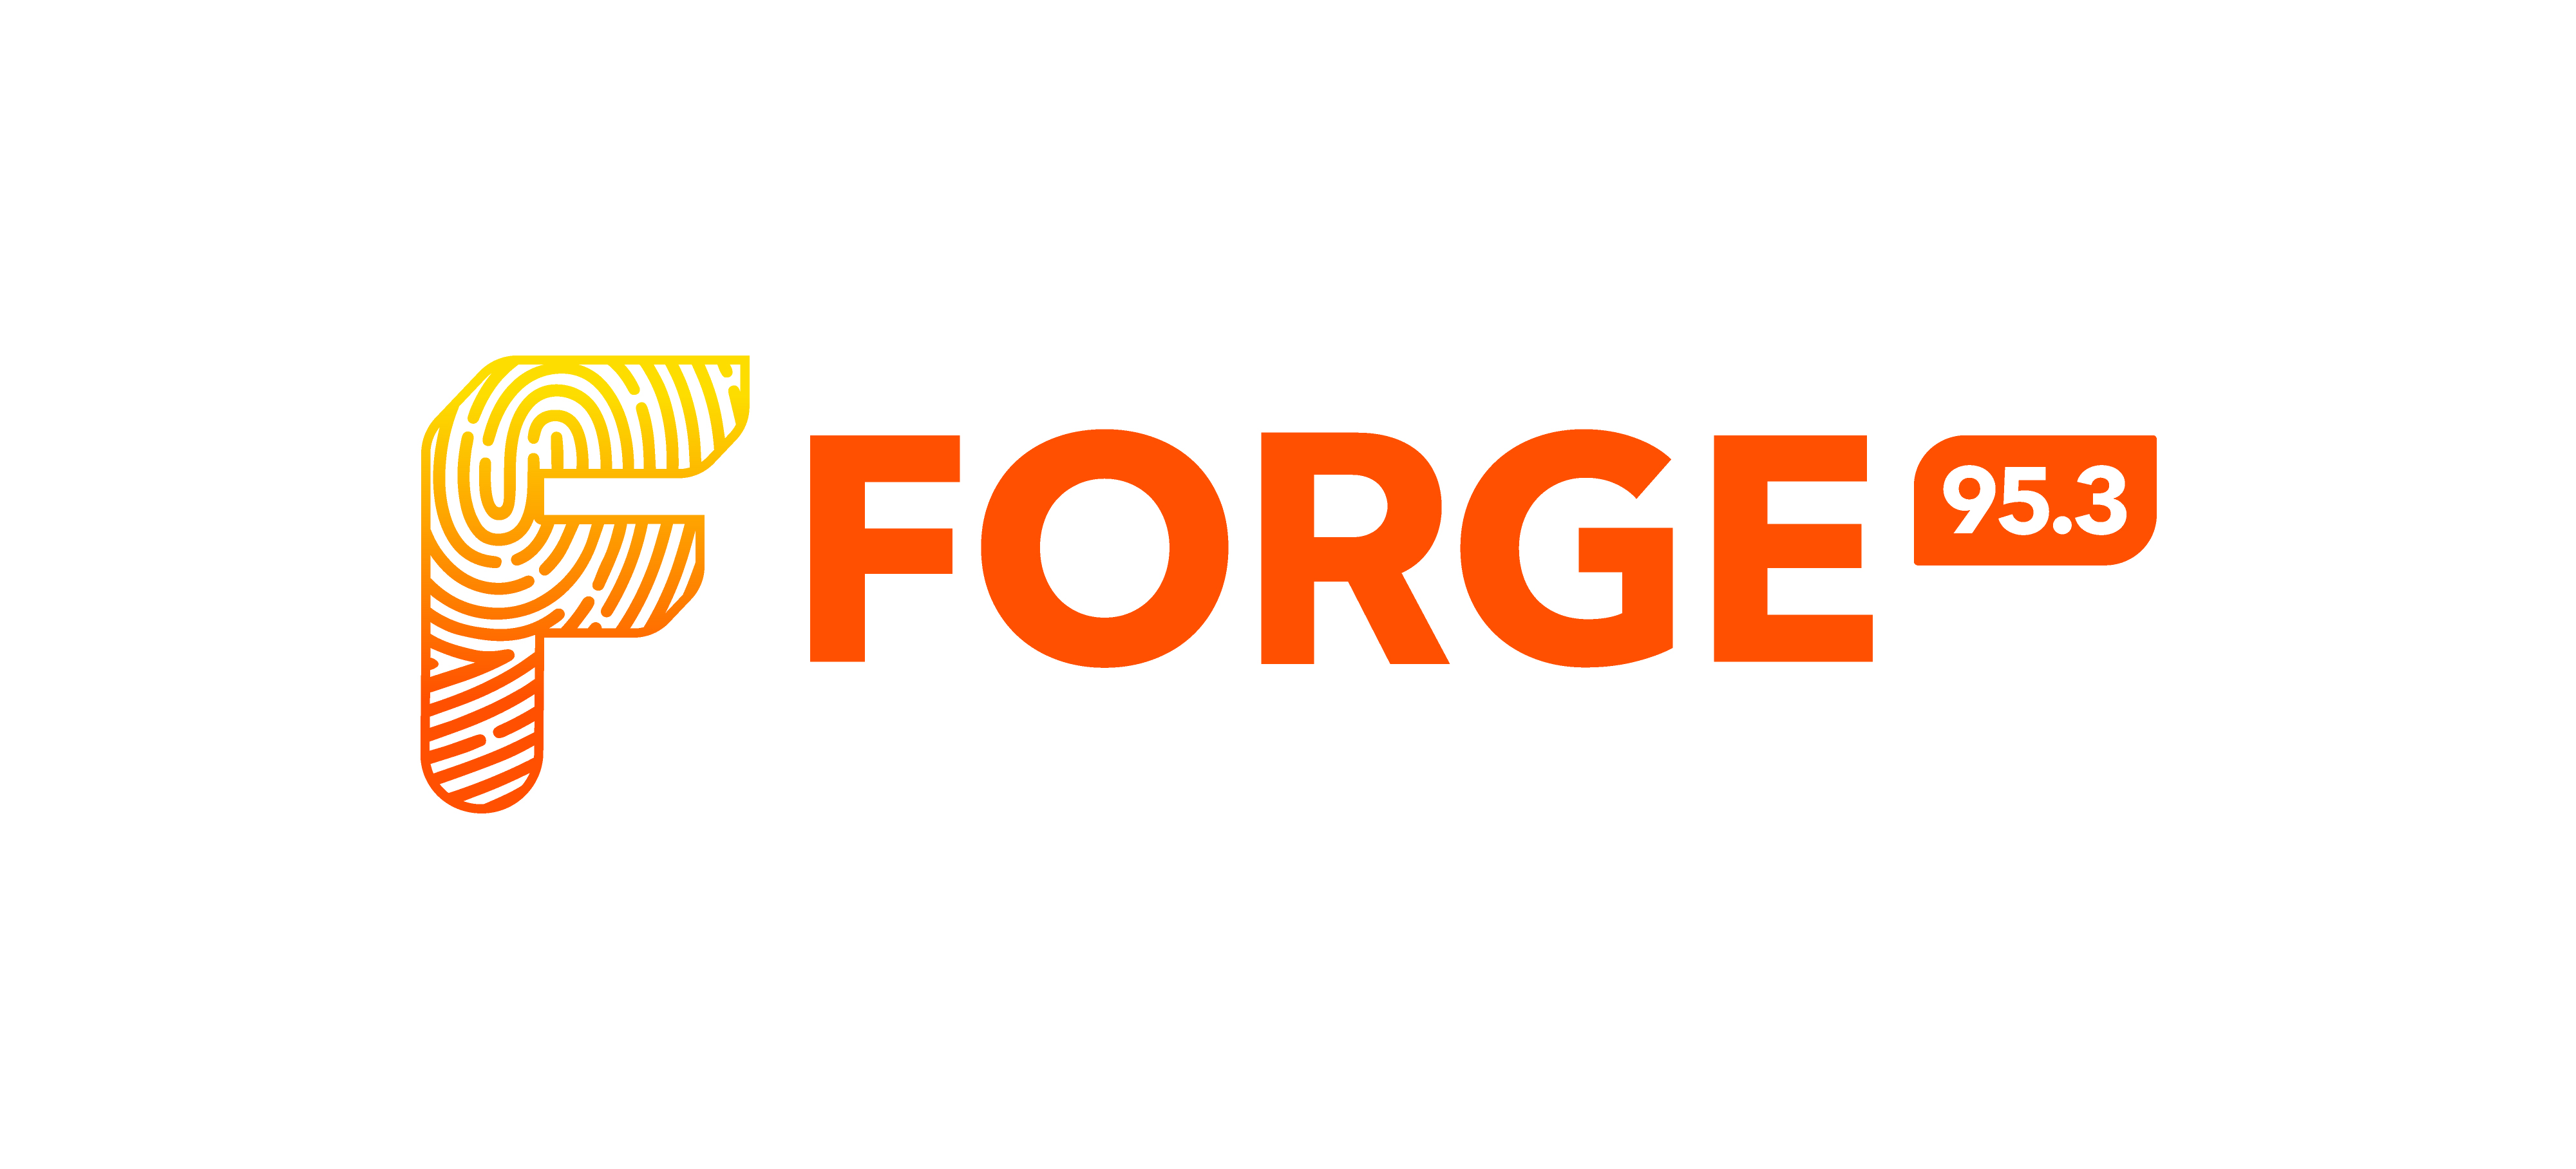 Forge 95.3